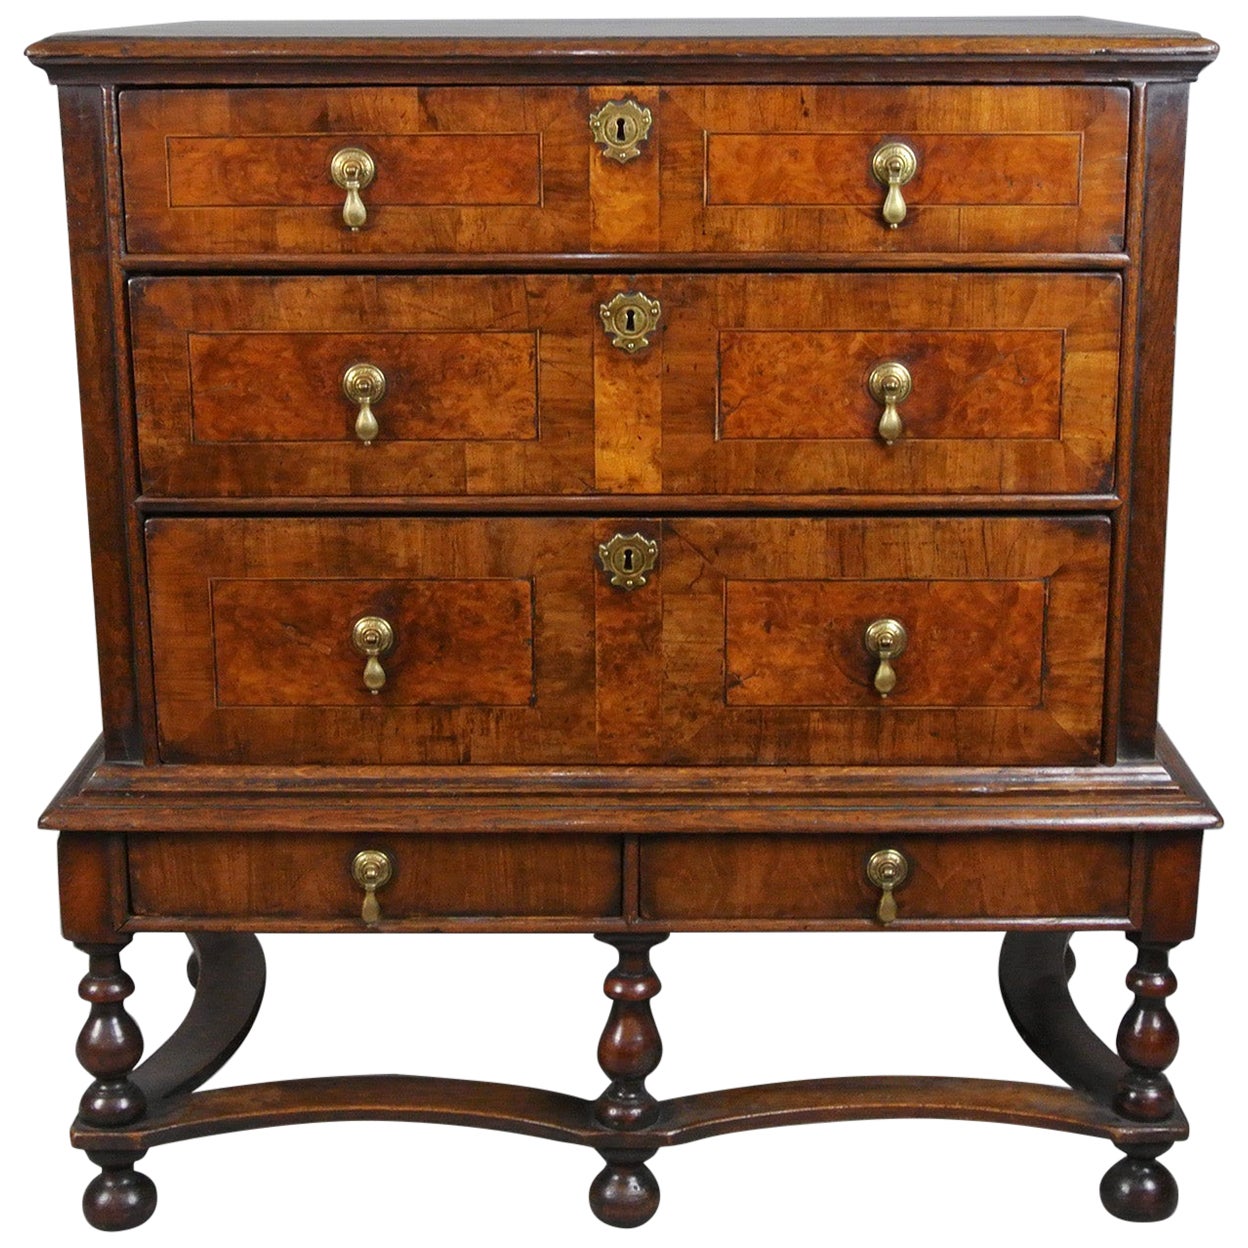 Exceptional William and Mary Walnut and Oak Chest on Stand c. 1690